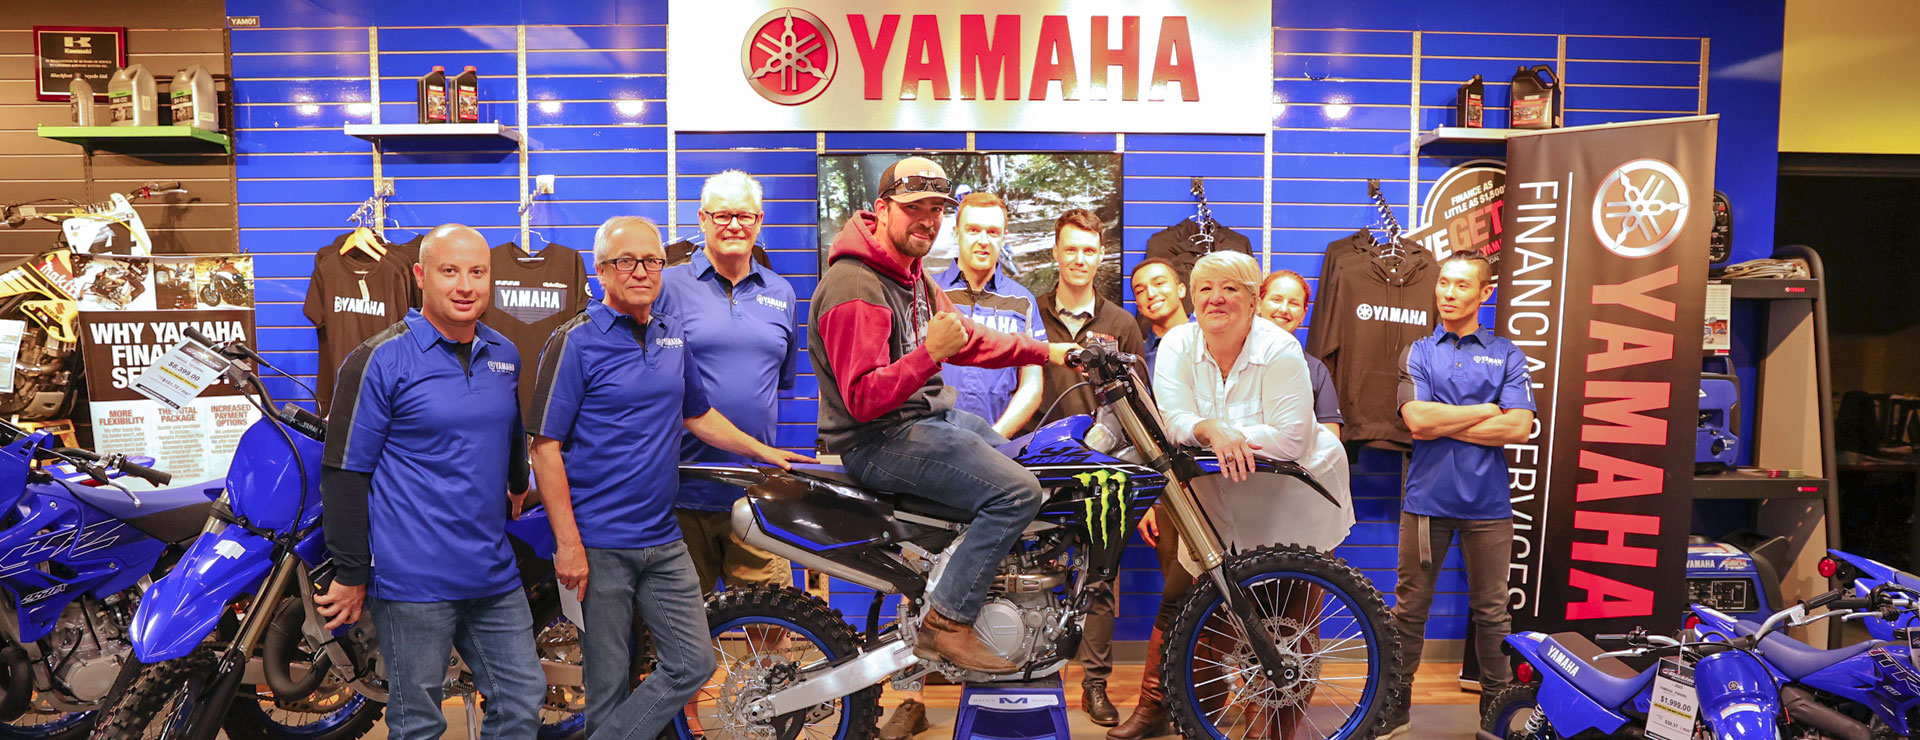 THIS YEAR'S WIN YOUR YAMAHA CONTEST WINNER!